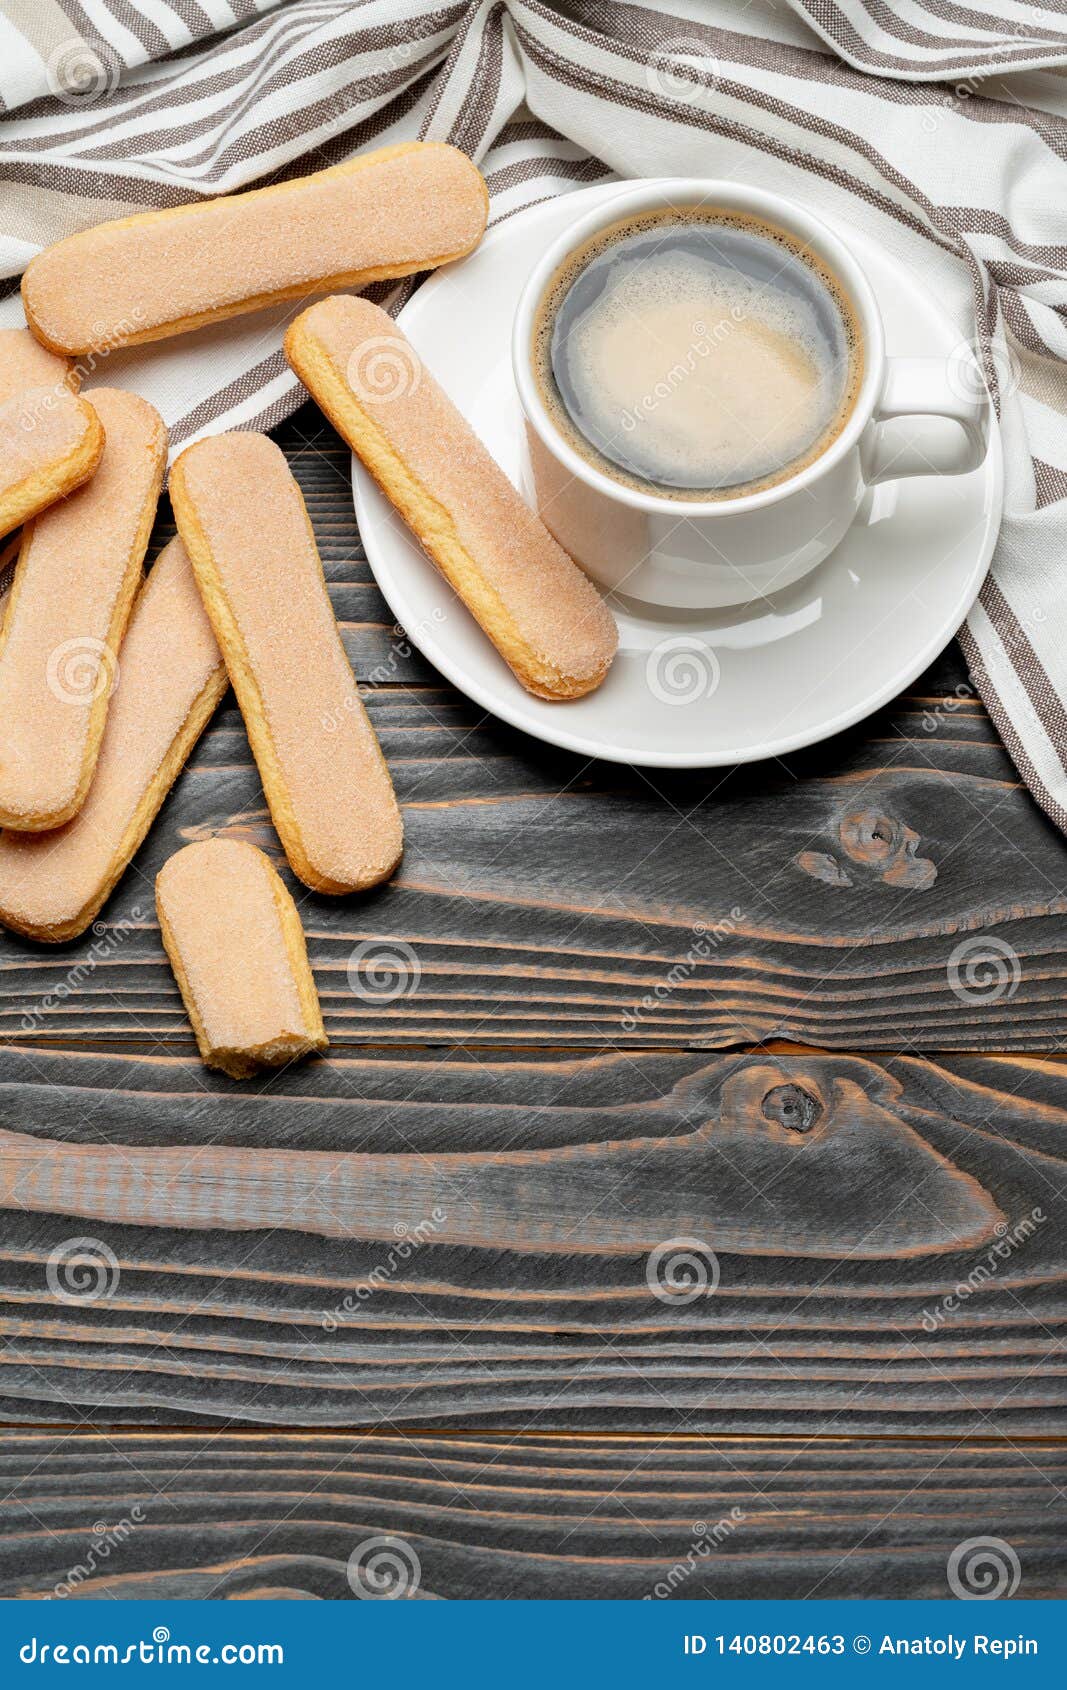 Italian Savoiardi Ladyfingers Biscuits and Cup of Coffee on Wooden ...